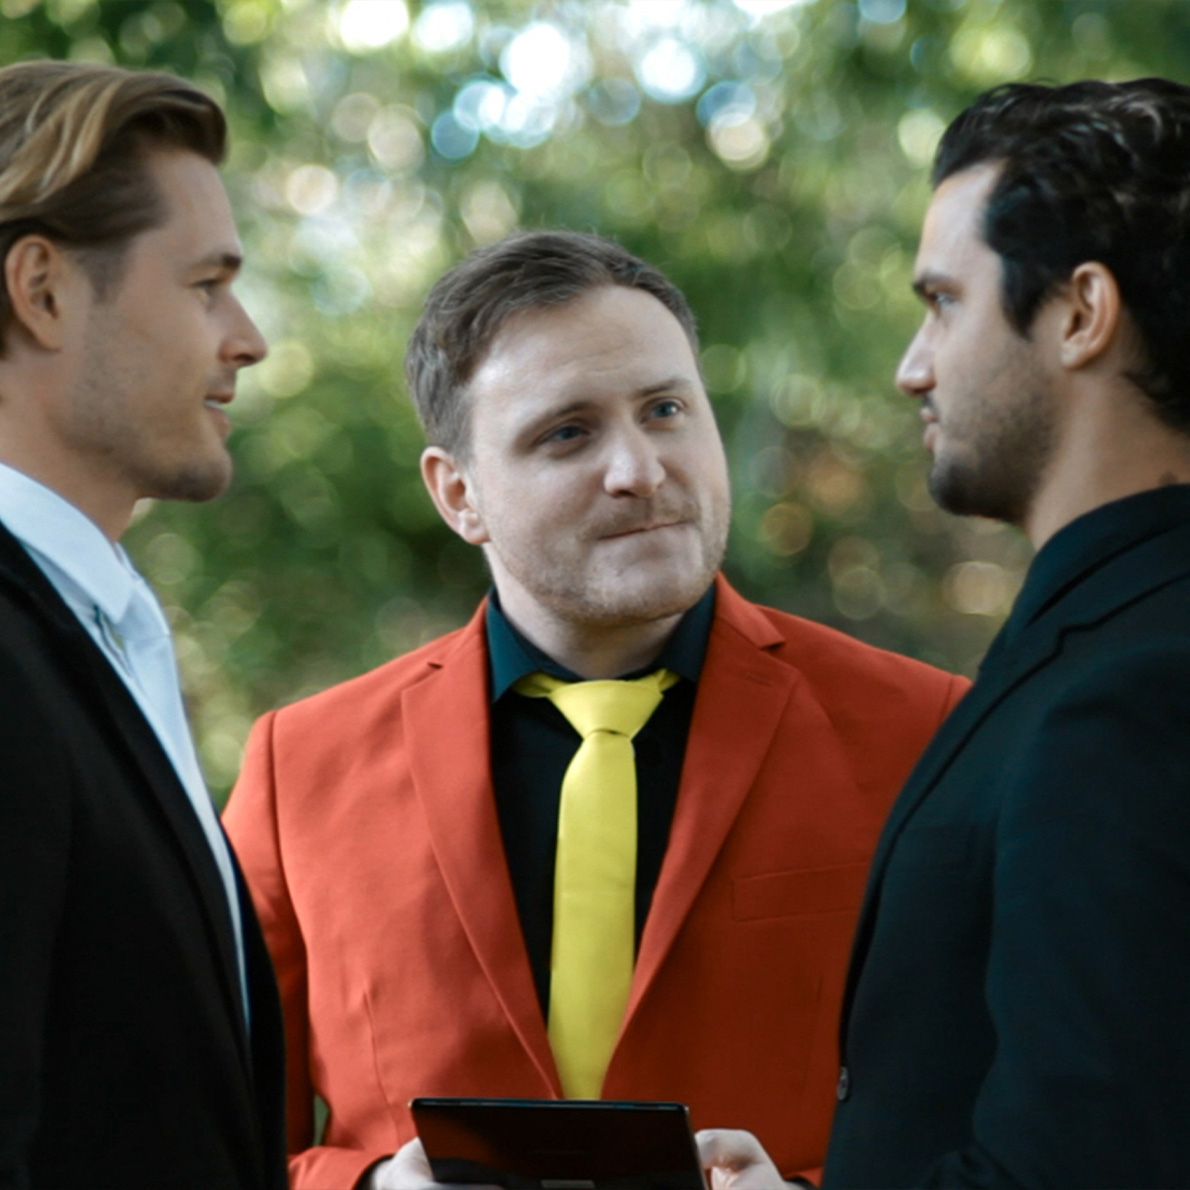 Ash Reynolds officiating a same-sex wedding, dressed in a vibrant suit, showcasing his inclusive and colorful approach to modern celebrancy.